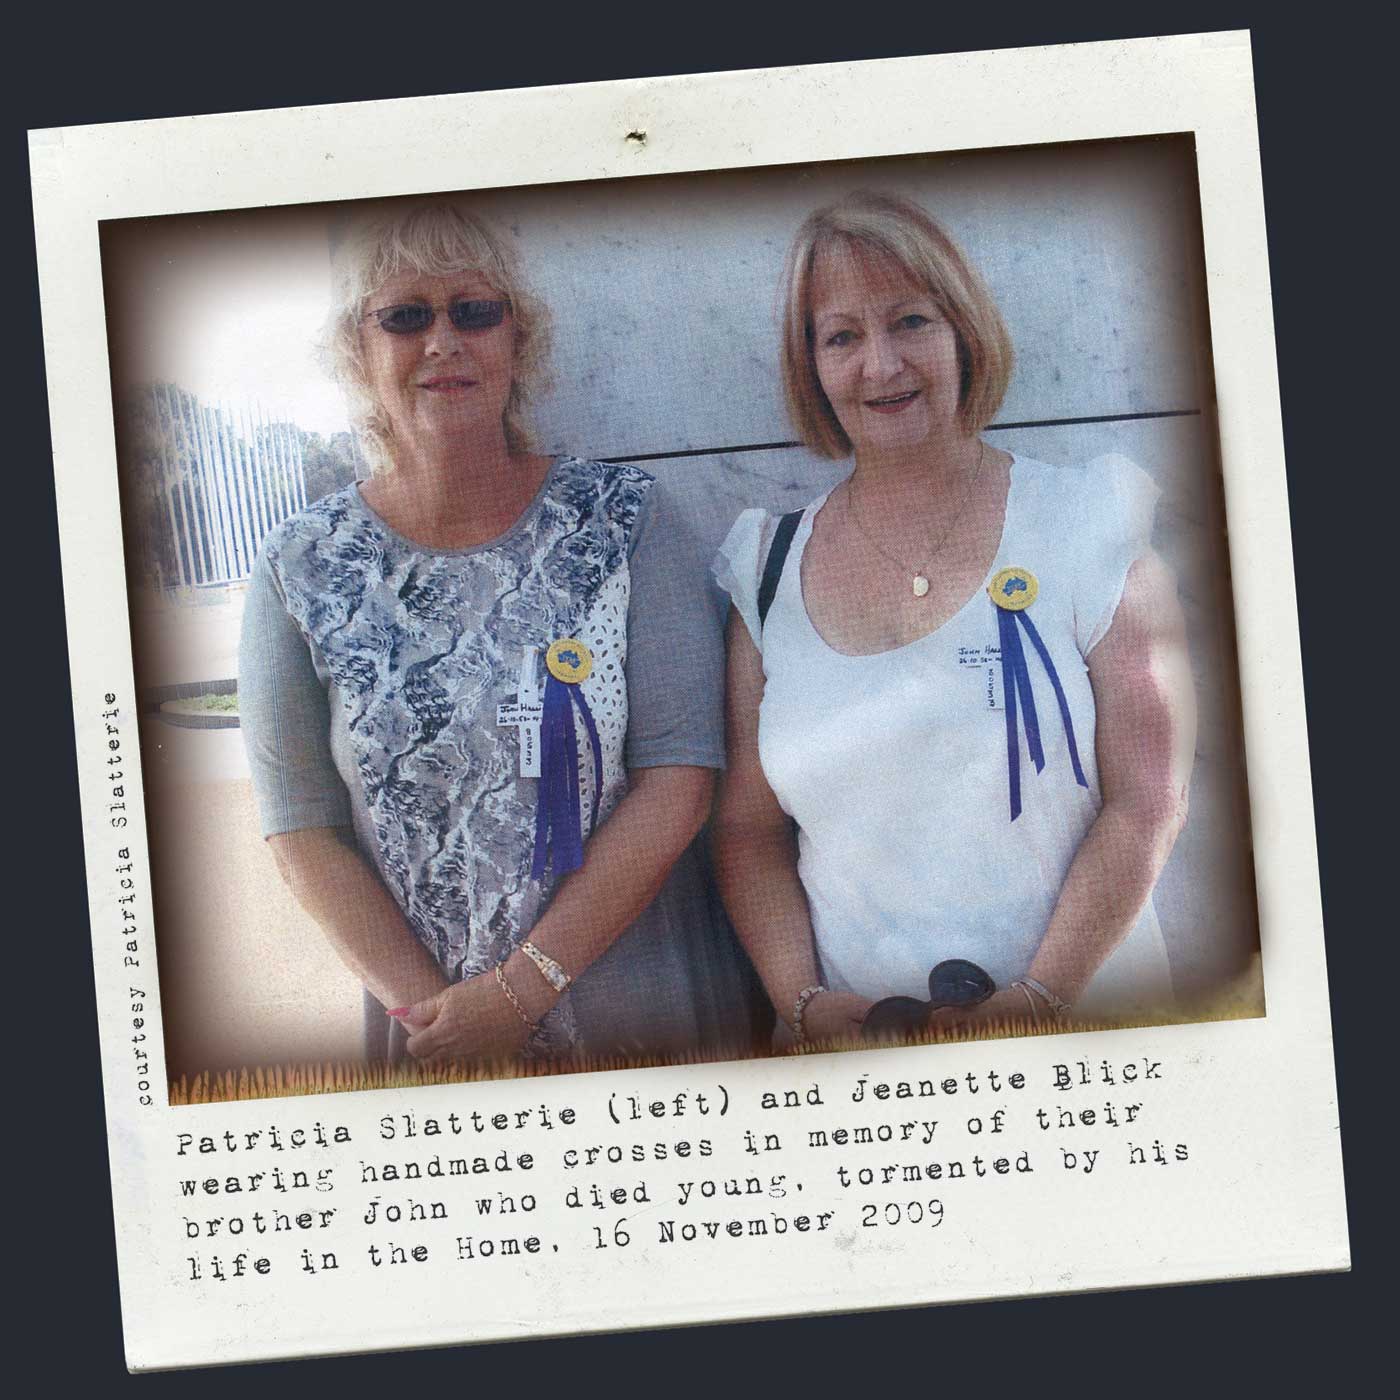 A colour Polaroid image of two women wearing badges and blue ribbons pinned to their shirts. Typewritten text below reads 'Patricia Slatterie (left) and Jeanette Blick wearing handmade crosses in memory of their brother John who died young, tormented by his life in the Home, 16 November 2009.' 'Courtesy Patricia Slatterie' is typed along the left side. - click to view larger image